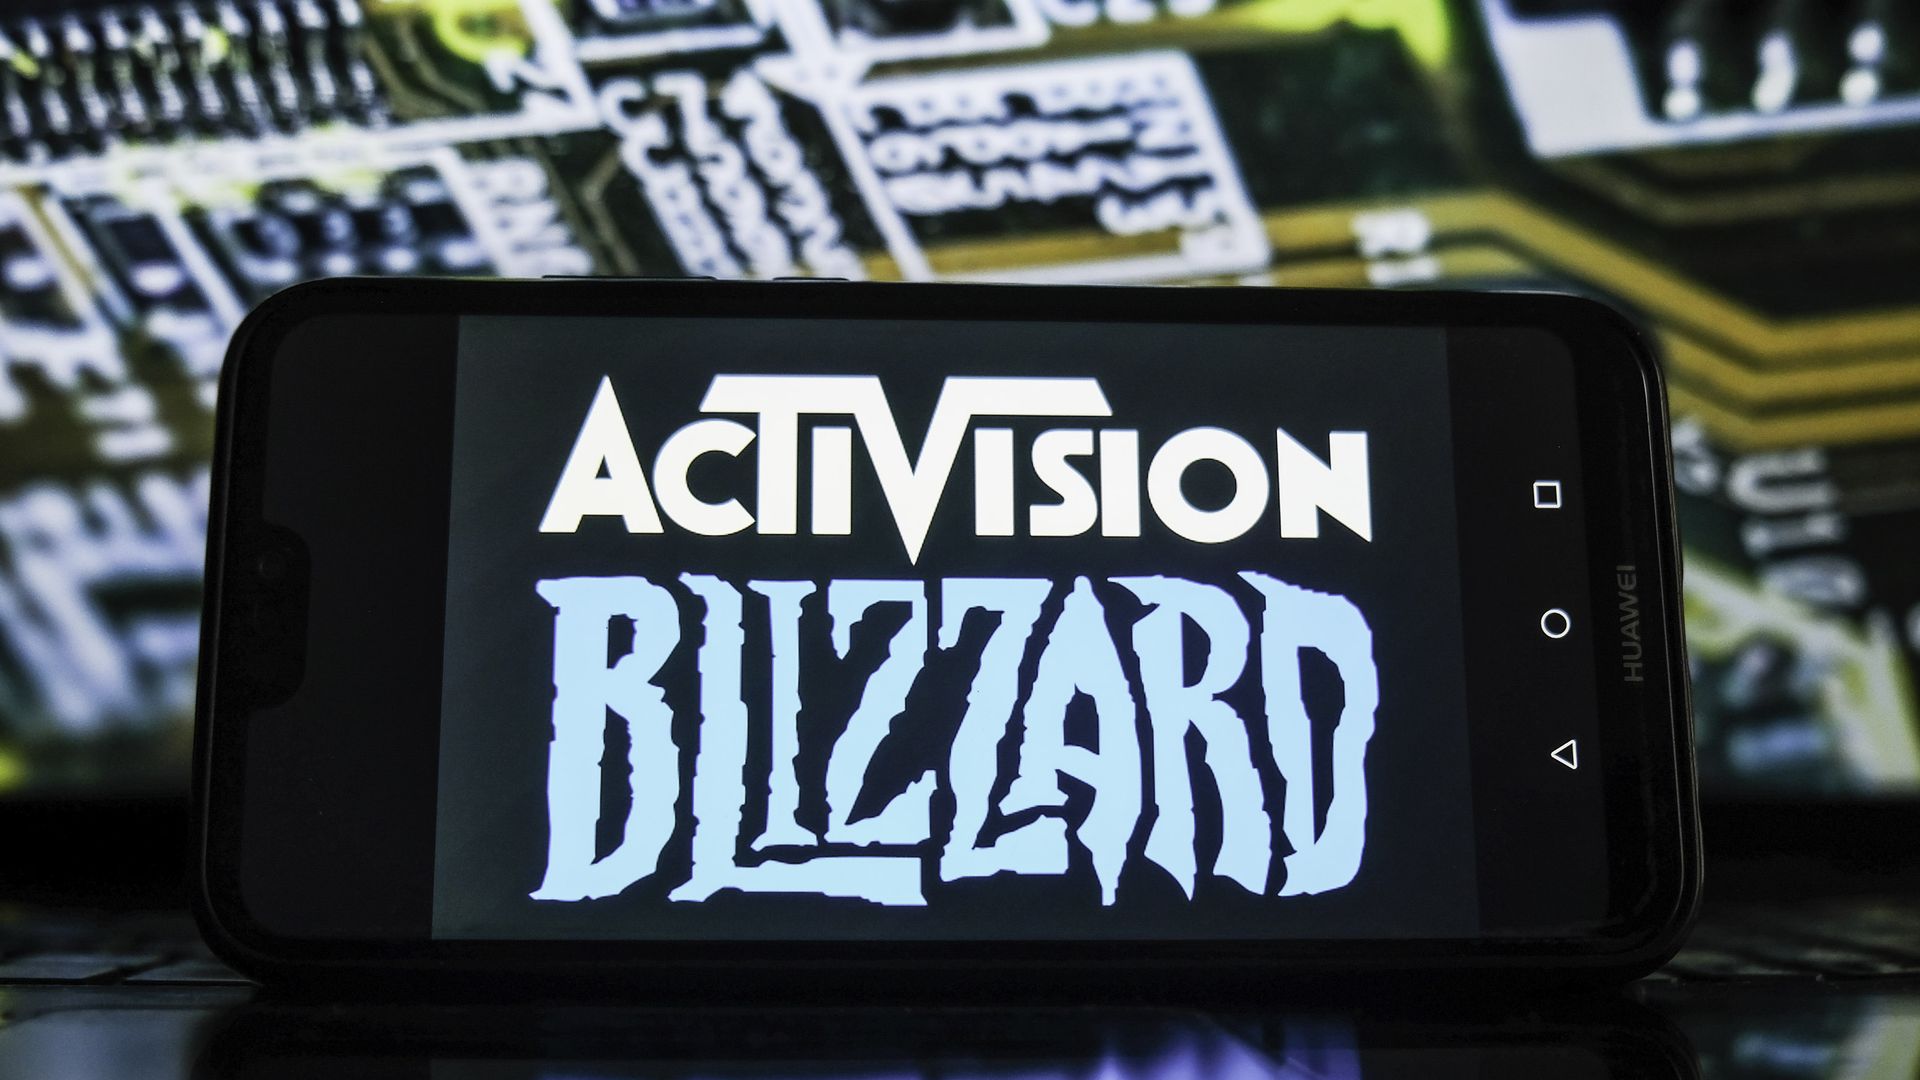 Photo of a phone showing the logos for Activision and Blizzard